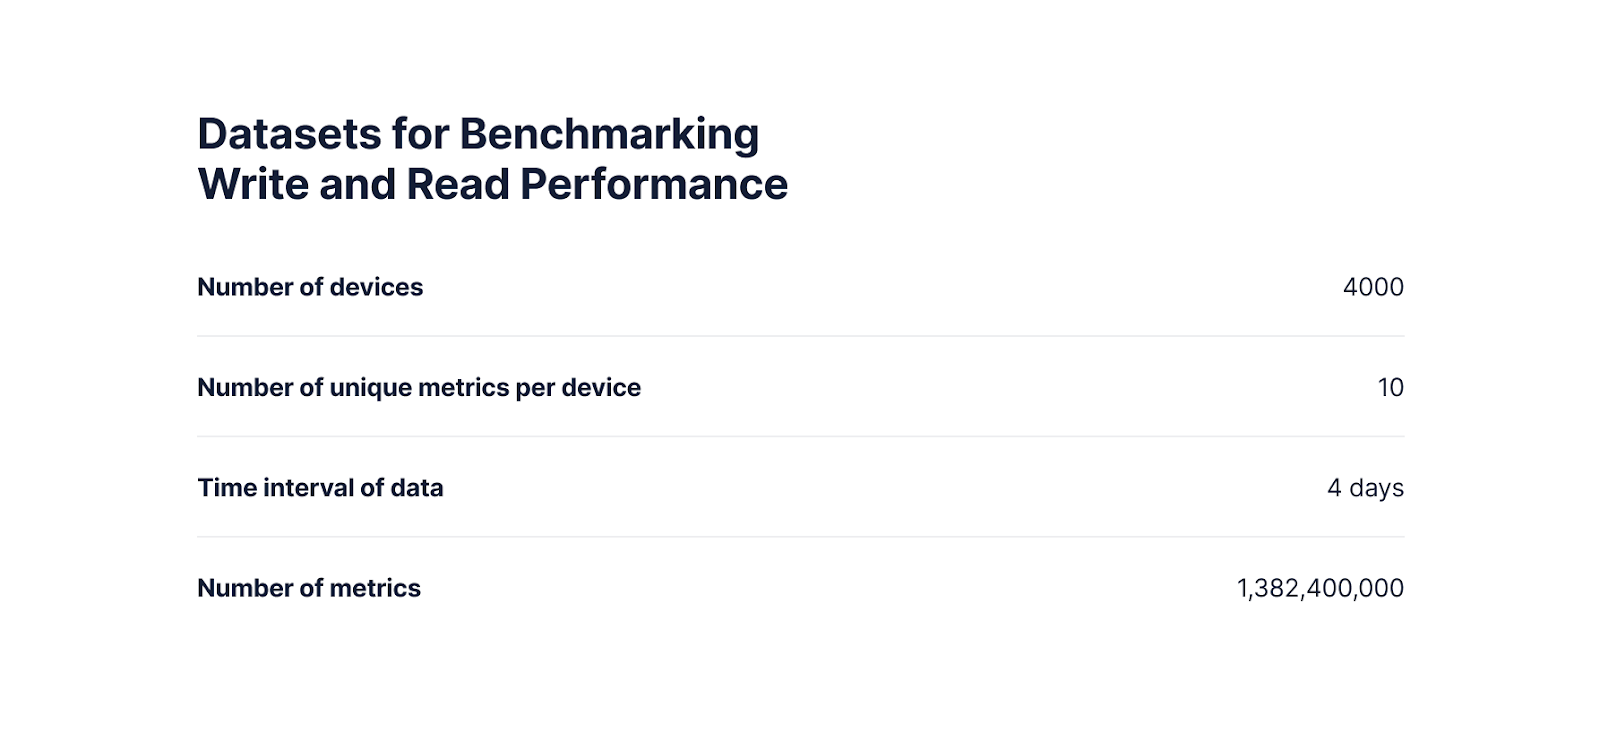 Details of the Devops dataset used to benchmark both write (ingest) and read (query) performance for MongoDB and TimescaleDB.